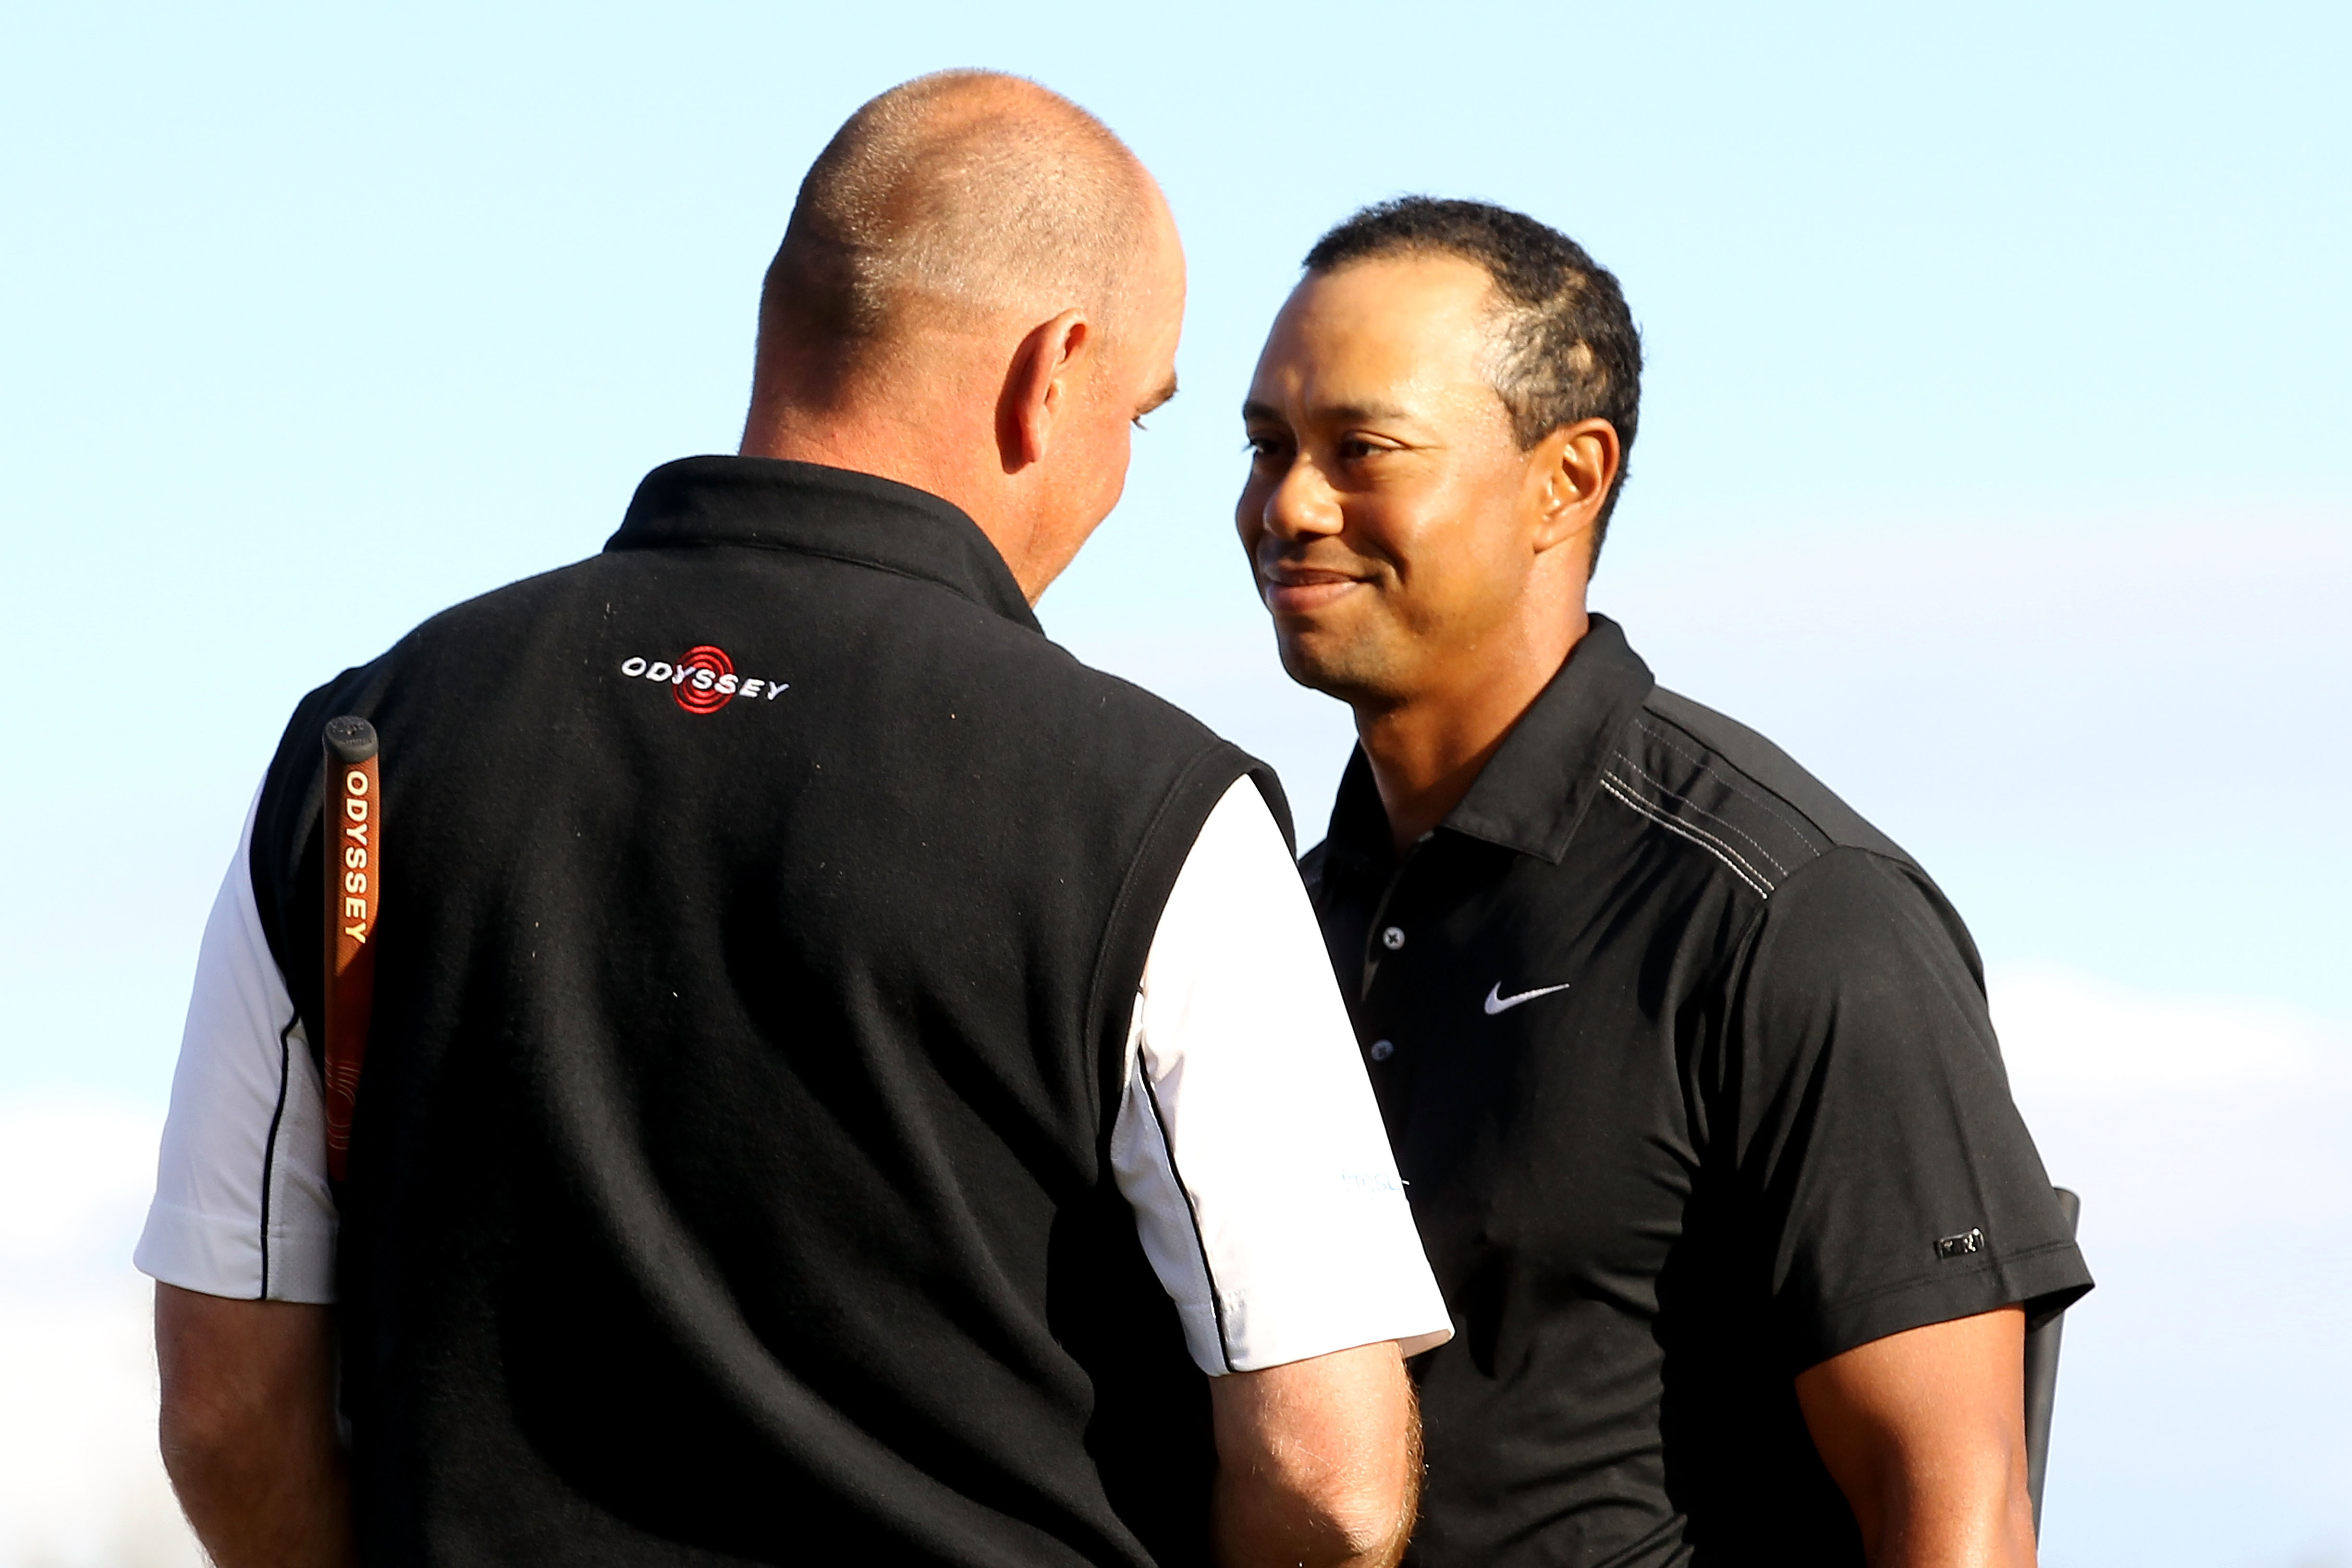 MARANA, AZ - FEBRUARY 23:  Tiger Woods (R) congratulates Thomas Bjorn of Denmark (L) on his win on the 19th hole during the first round of the Accenture Match Play Championship at the Ritz-Carlton Golf Club on February 23, 2011 in Marana, Arizona.  (Photo